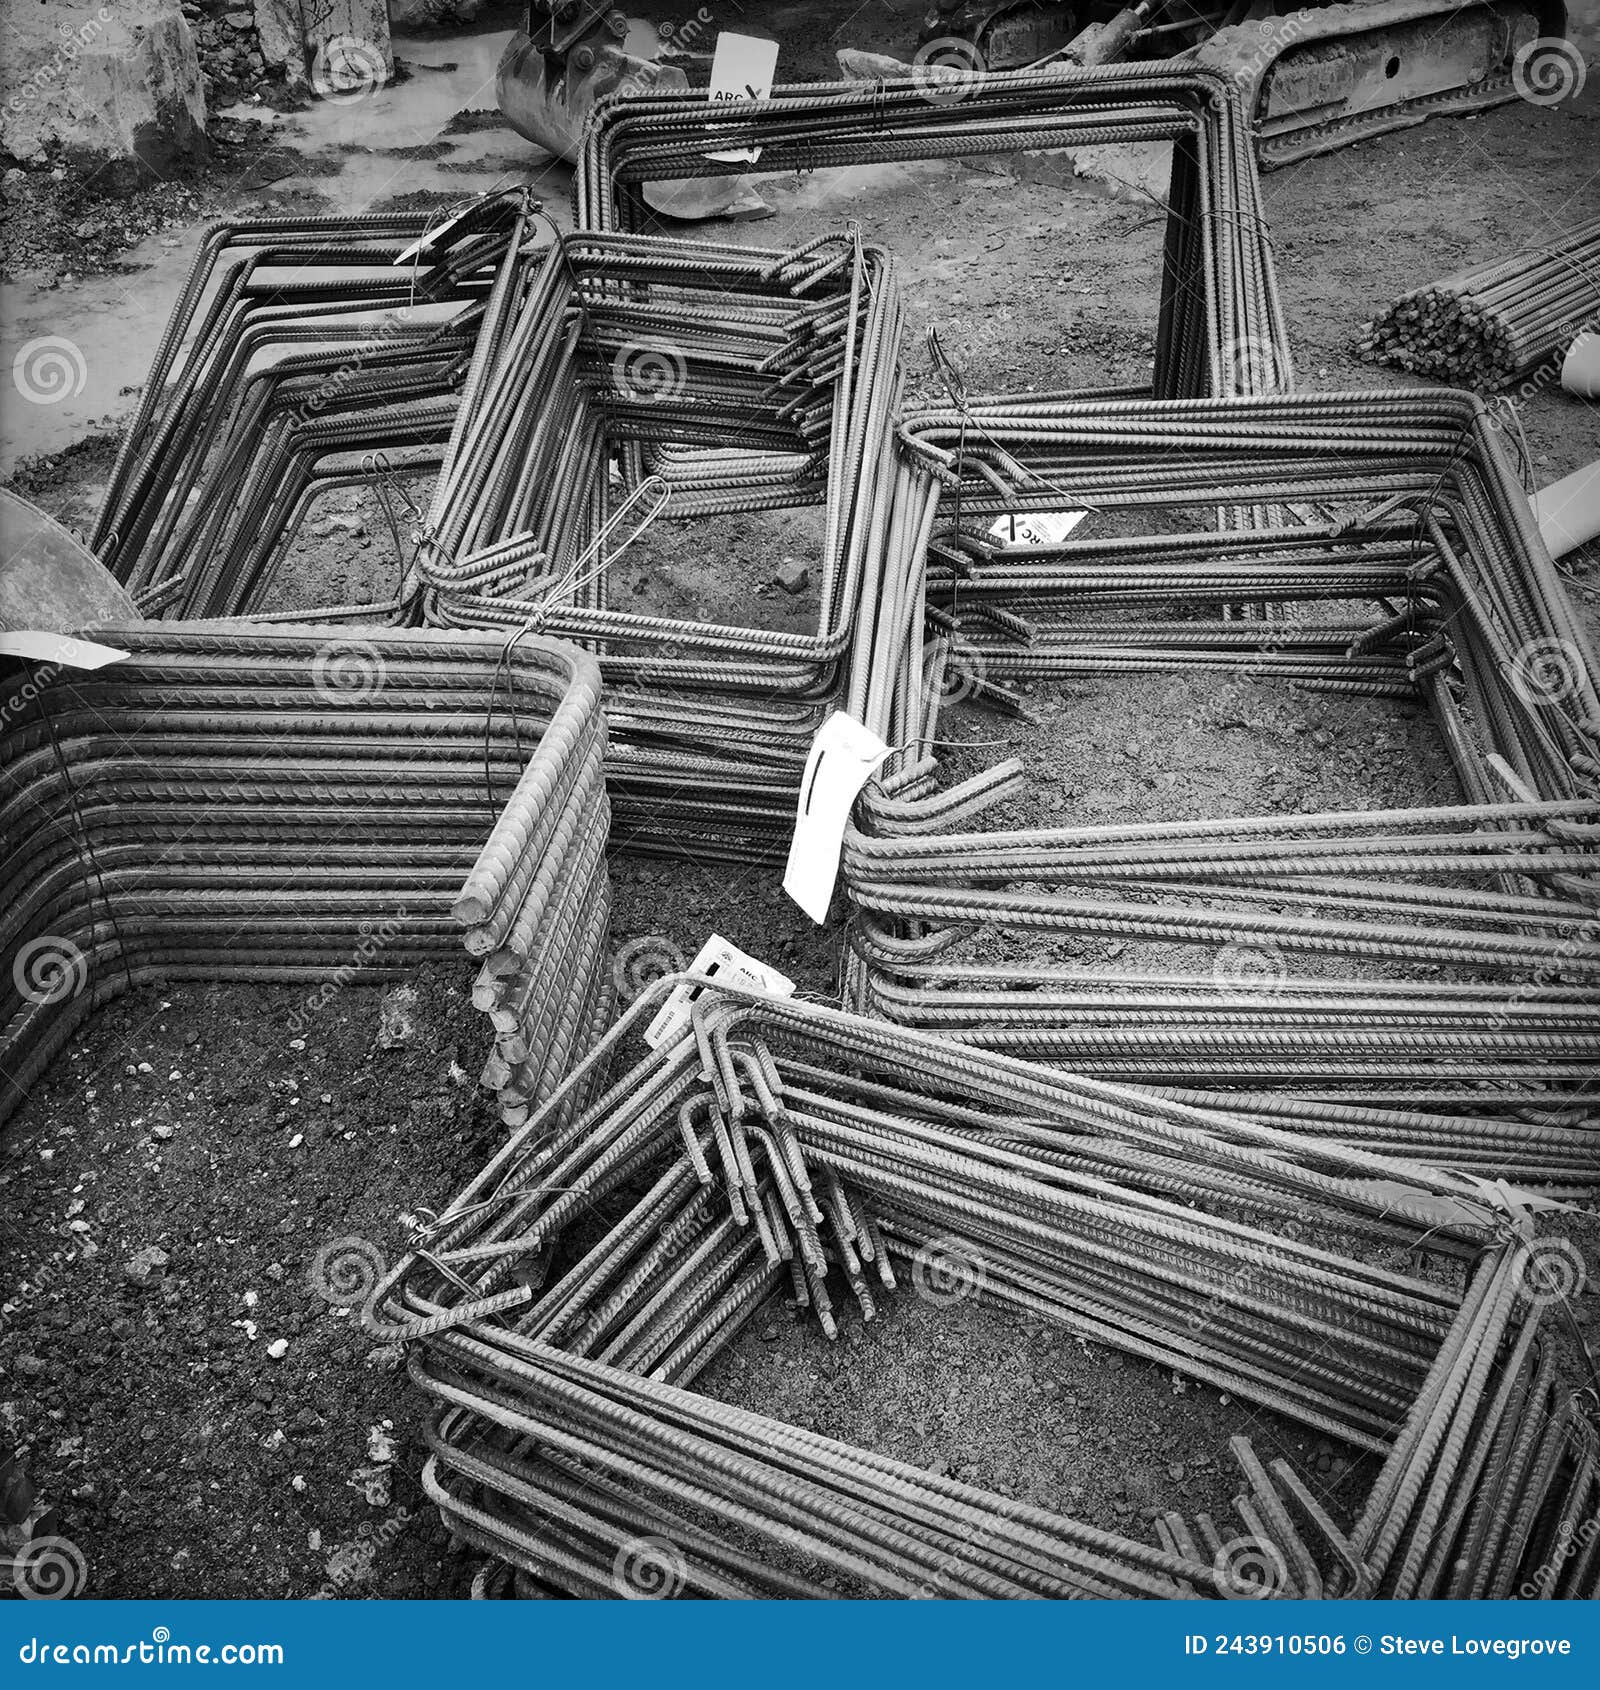 stacks of steel reinforcing also called rebar or reo